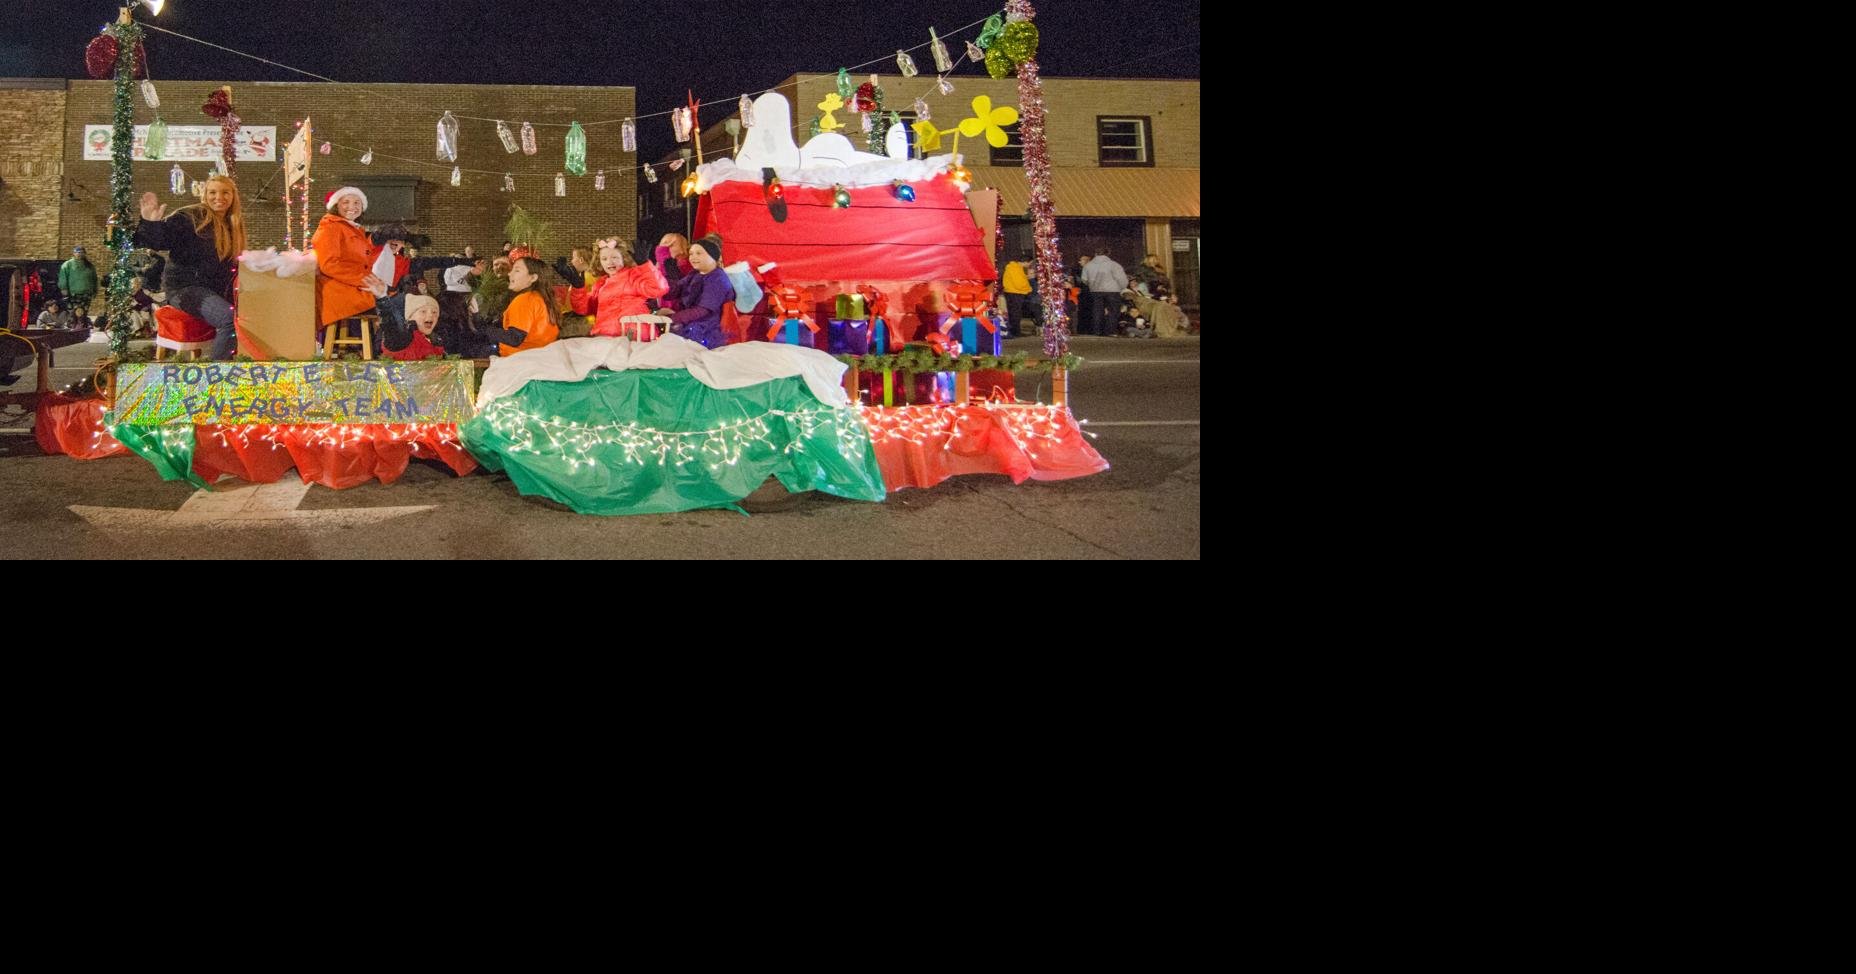 Registration open for Tullahoma Christmas parade Local News